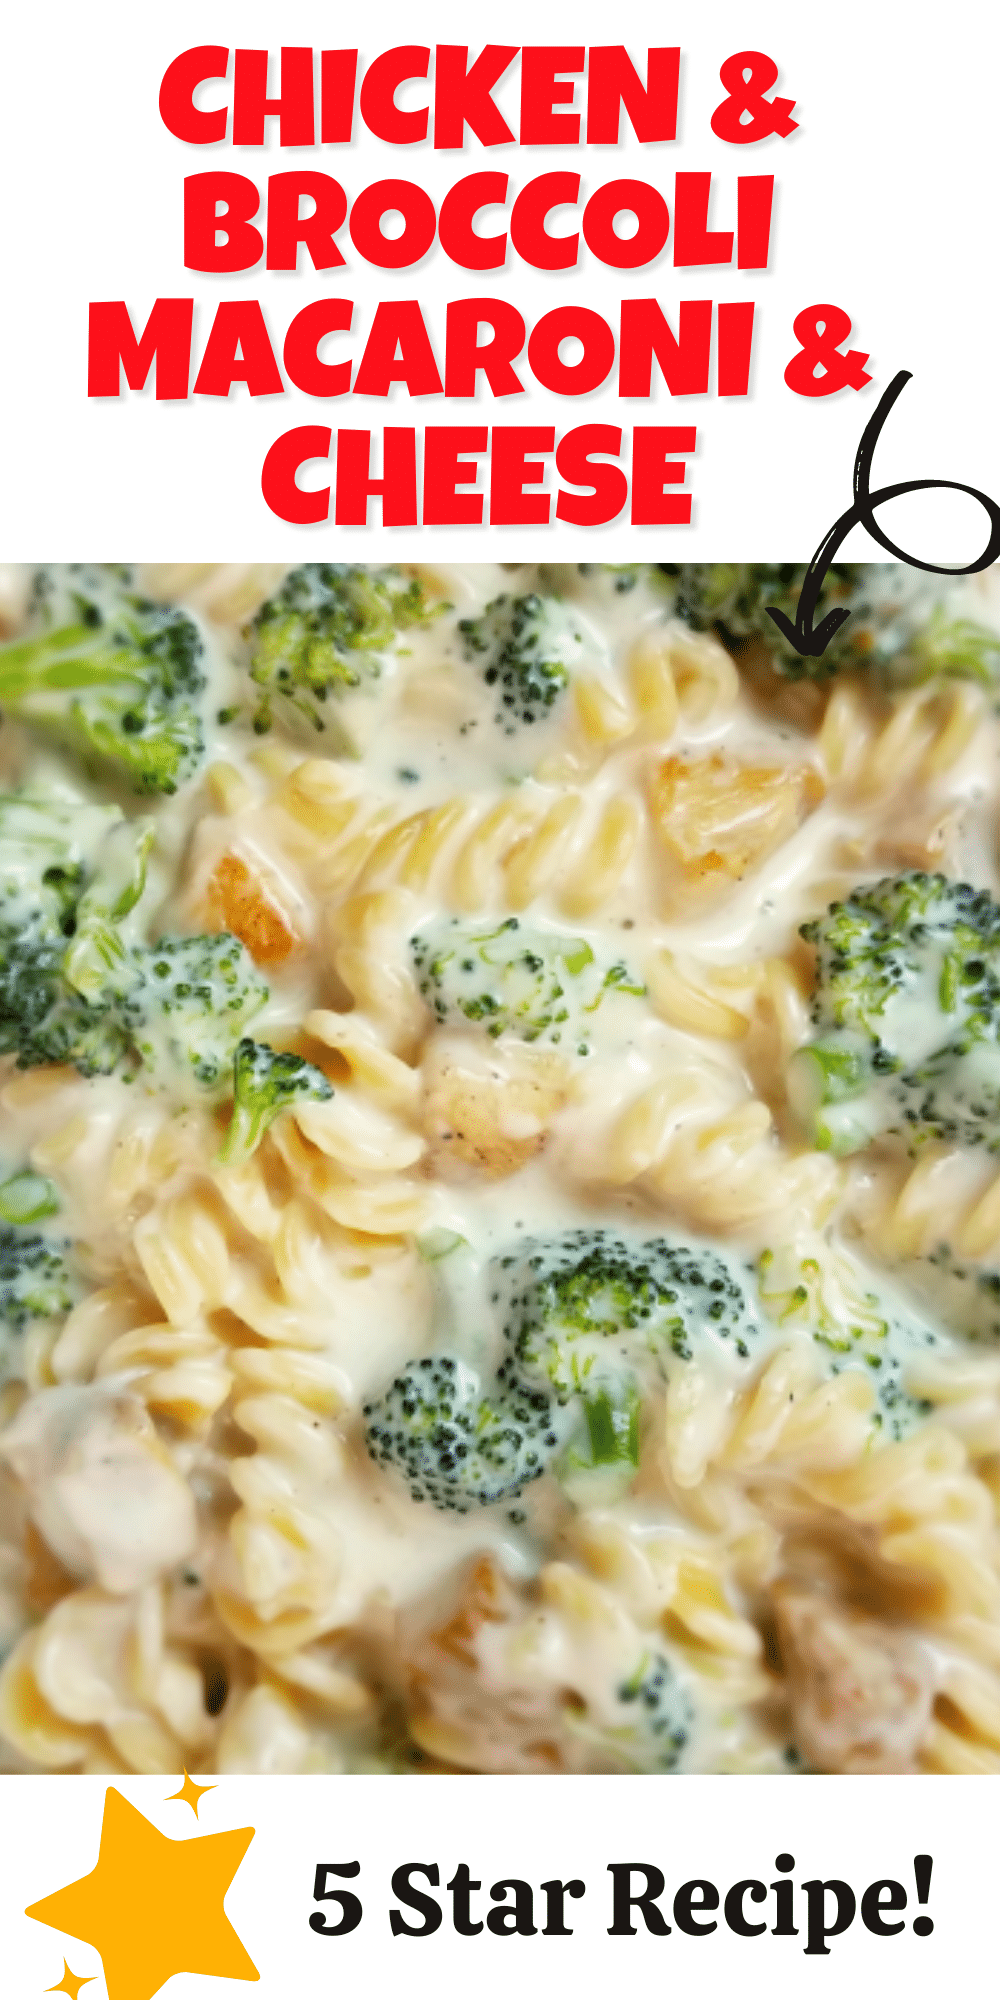  This Macaroni and Cheese turns out to be a complete meal when grilled chicken and steamed broccoli is added to the mix! Chicken and Broccoli Macaroni and Cheese turns a side dish into dinner! via @bigbearswife